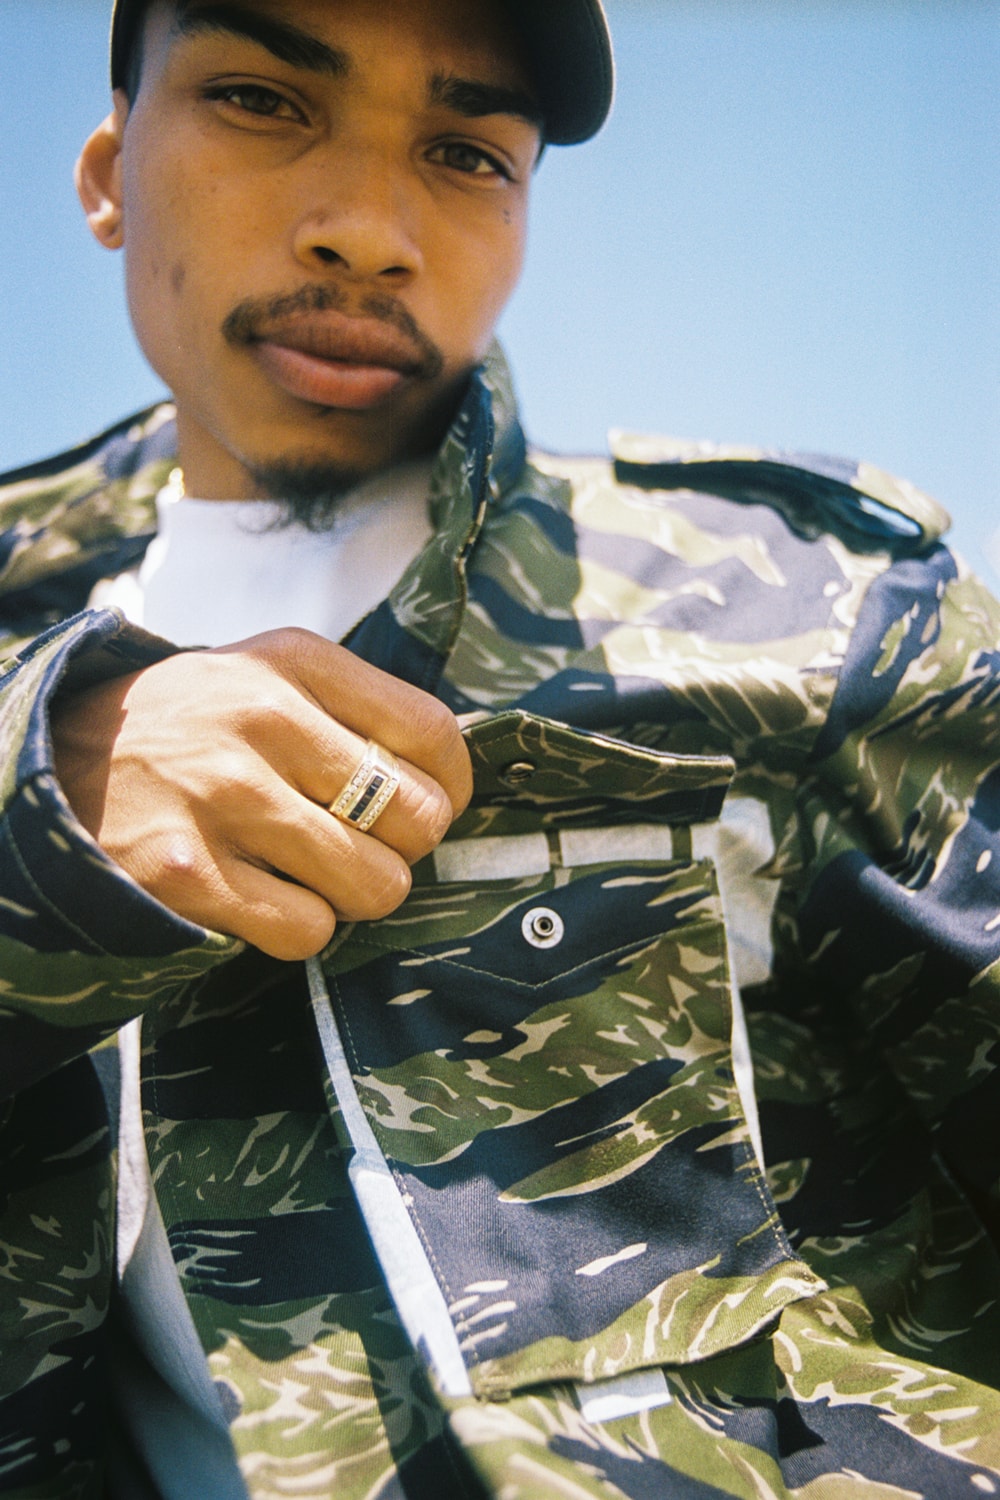 UNDEFEATED UNDFTD GOODENOUGH Tiger Camo Capsule Collection Flight Jacket Flight Pants Hoodie